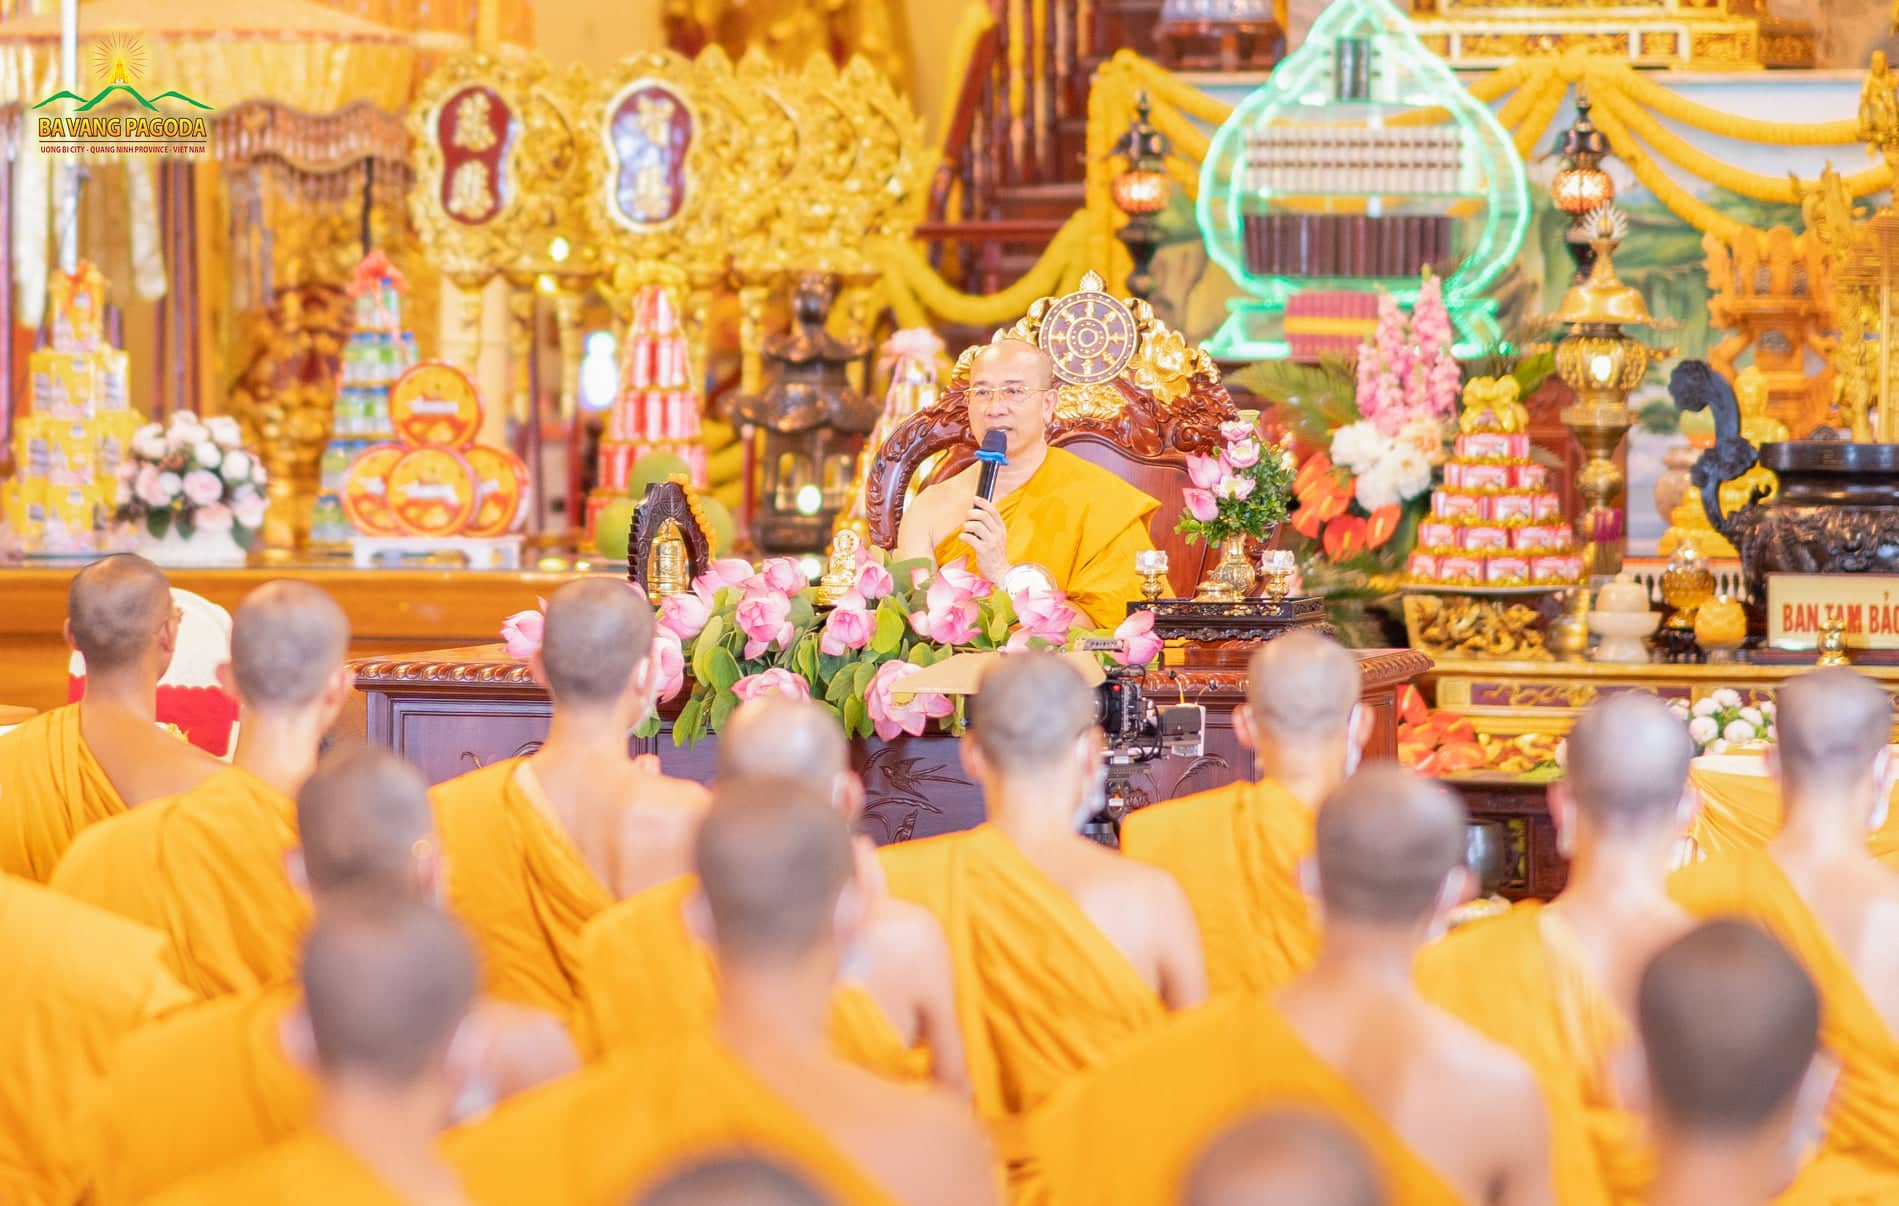 Thay Thich Truc Thai Minh witnessing the ceremony for generating Bodhi mind for the Ba Vang Pagodas community.